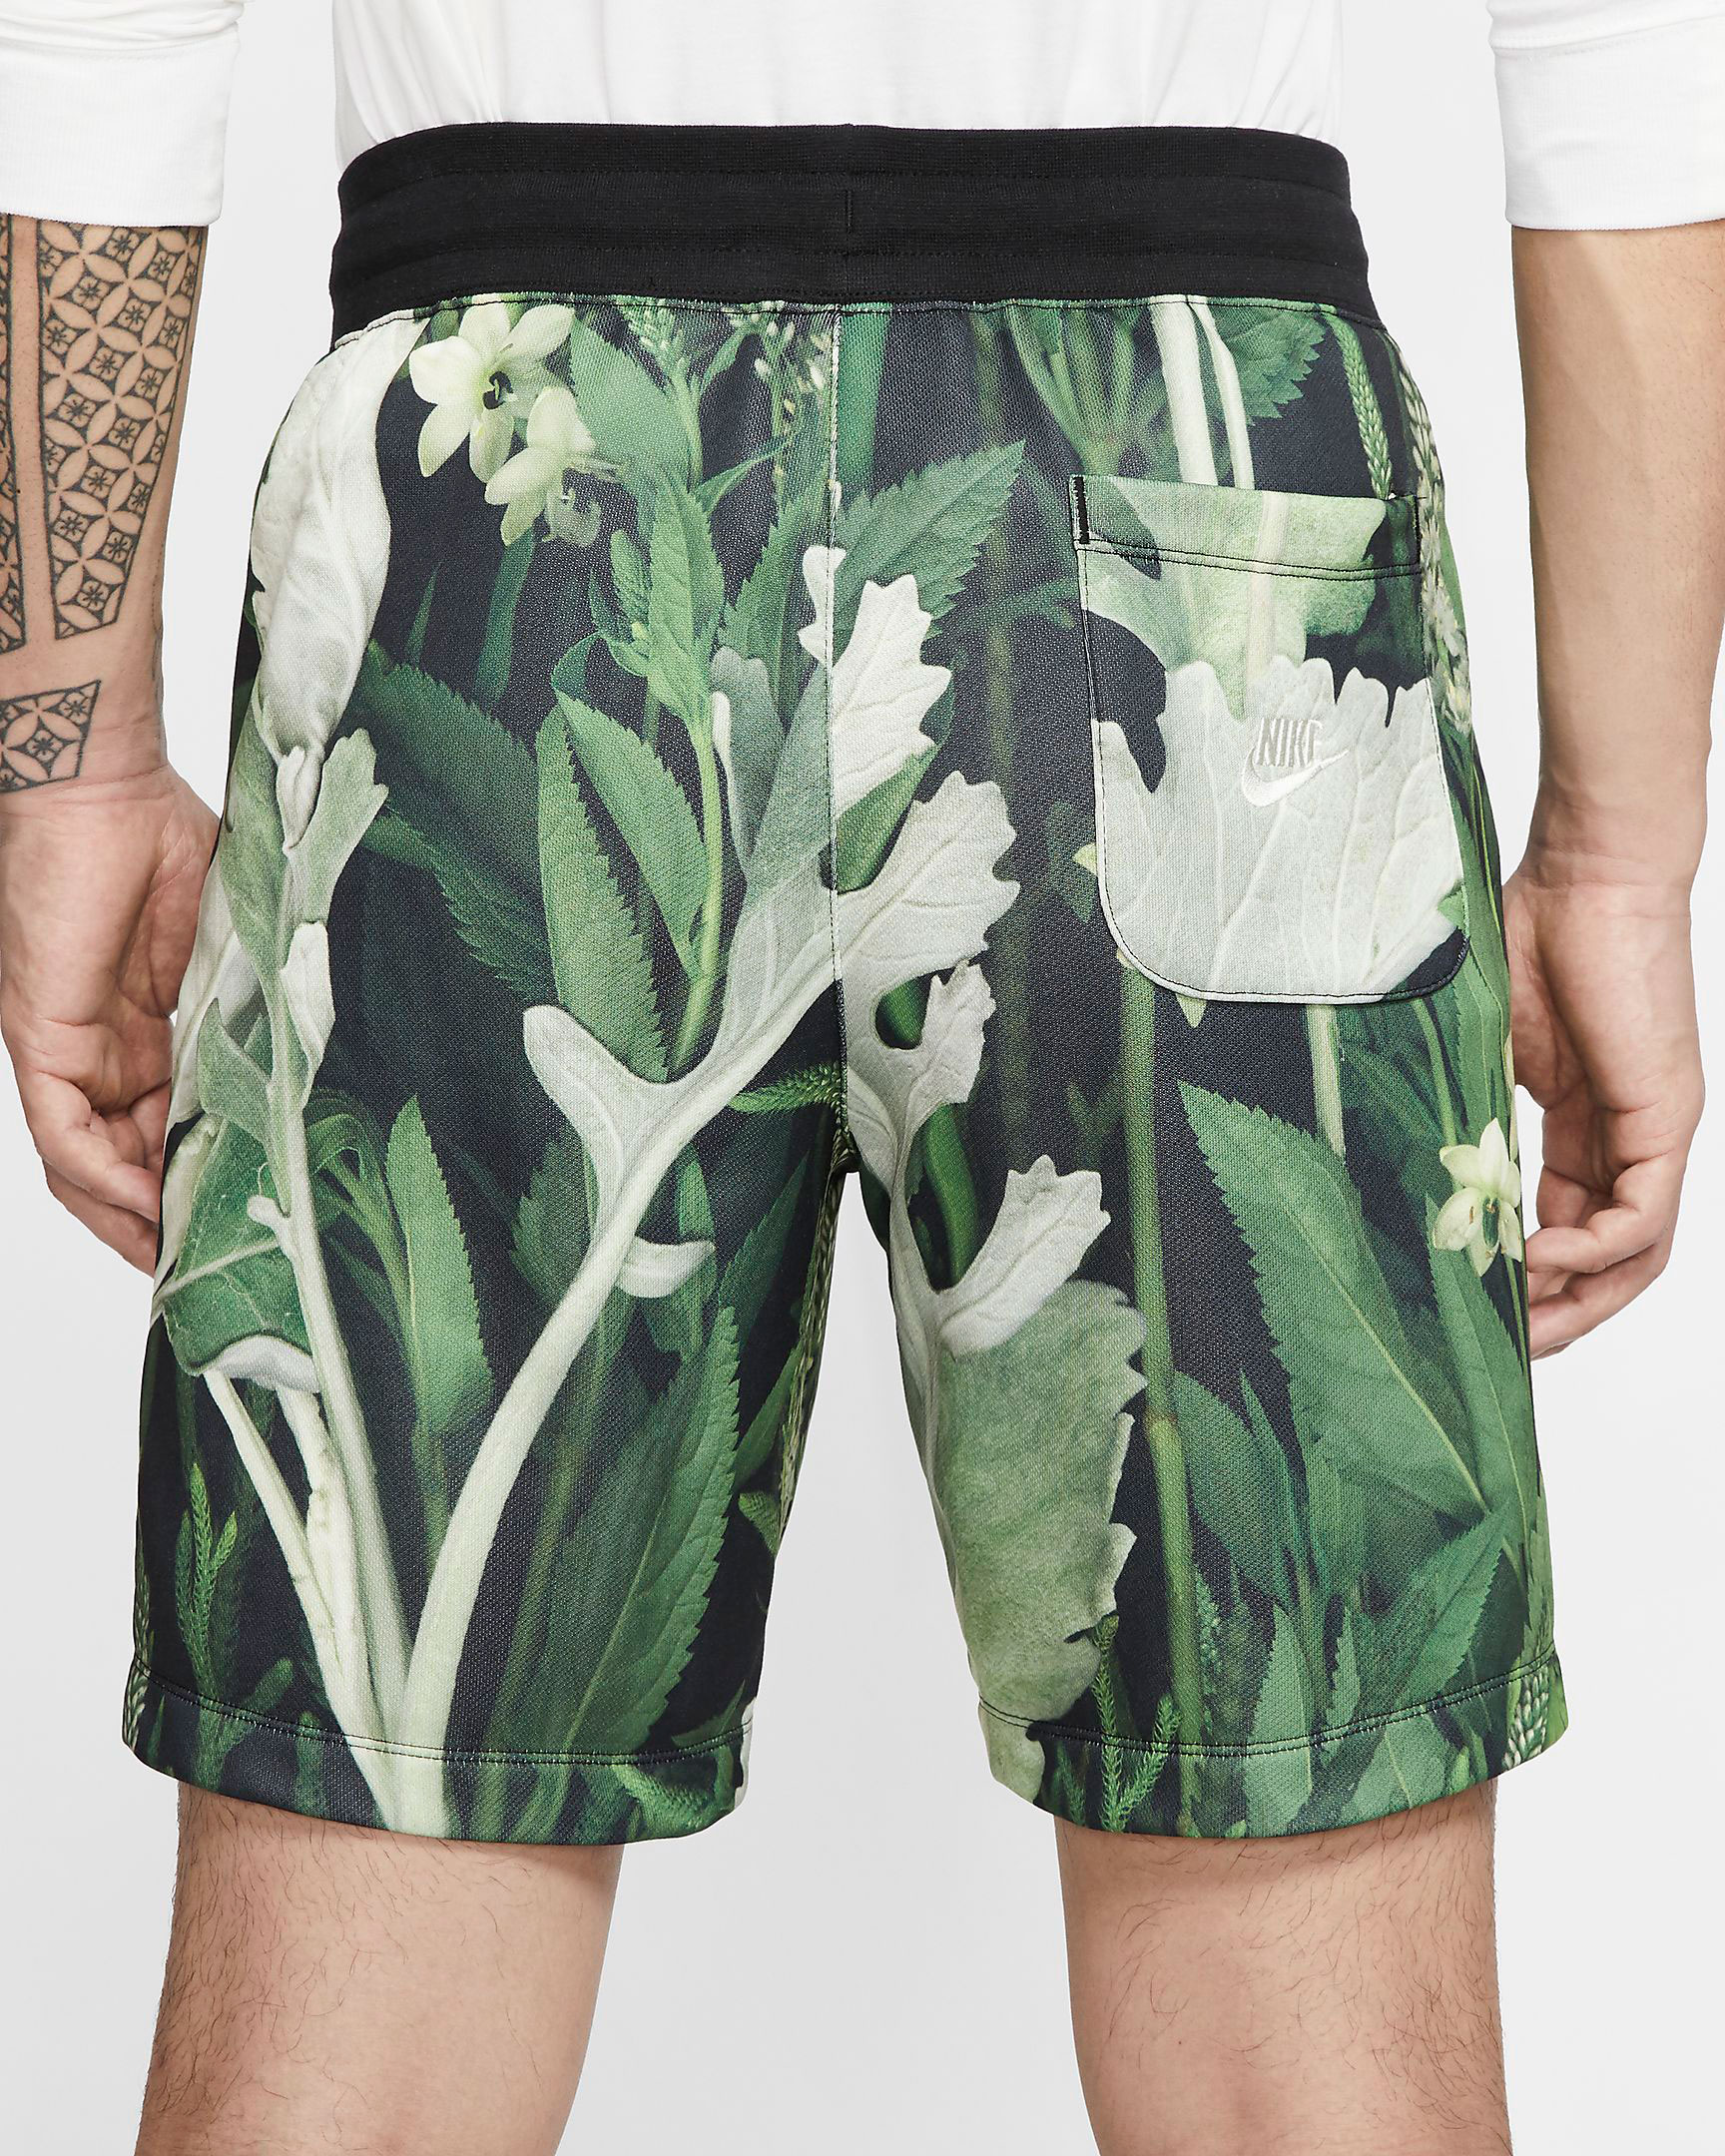 nike-just-do-it-floral-green-shorts-2